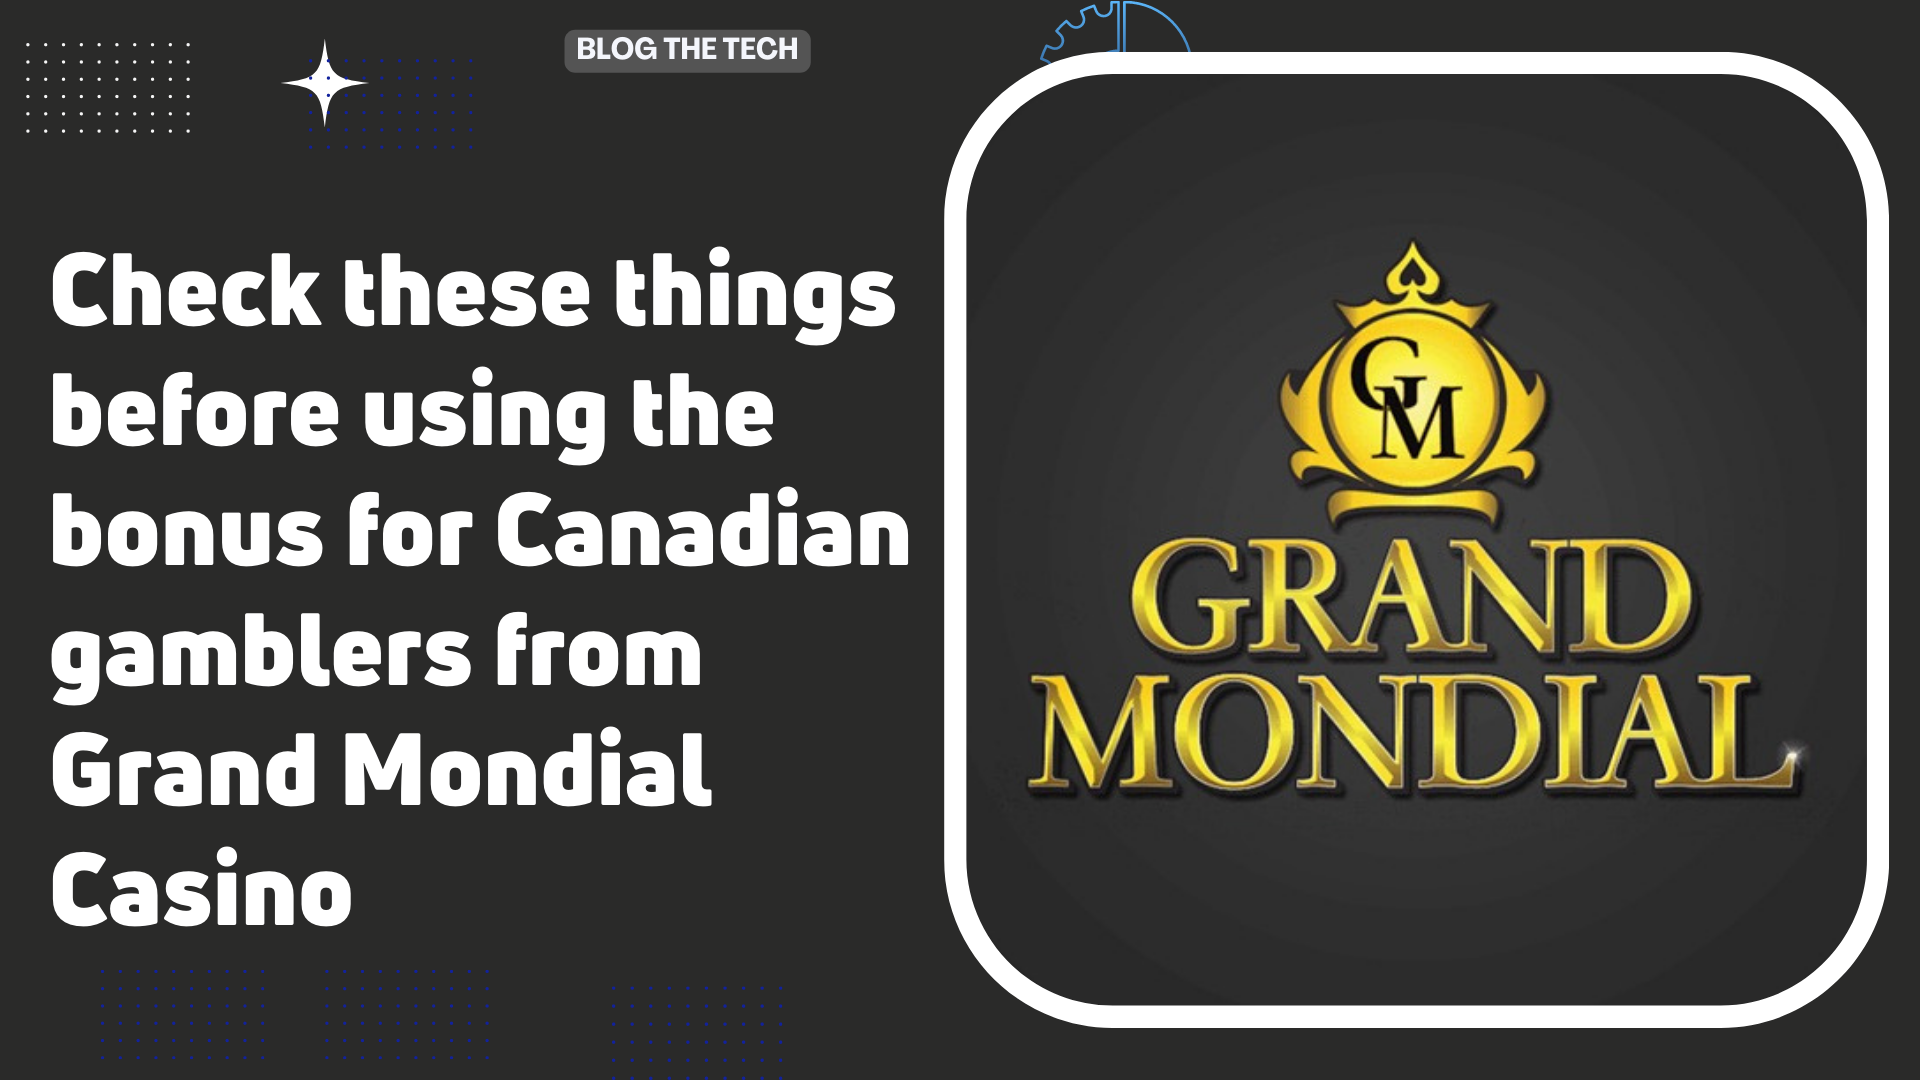 Check these things before using the bonus for Canadian gamblers from Grand Mondial Casino